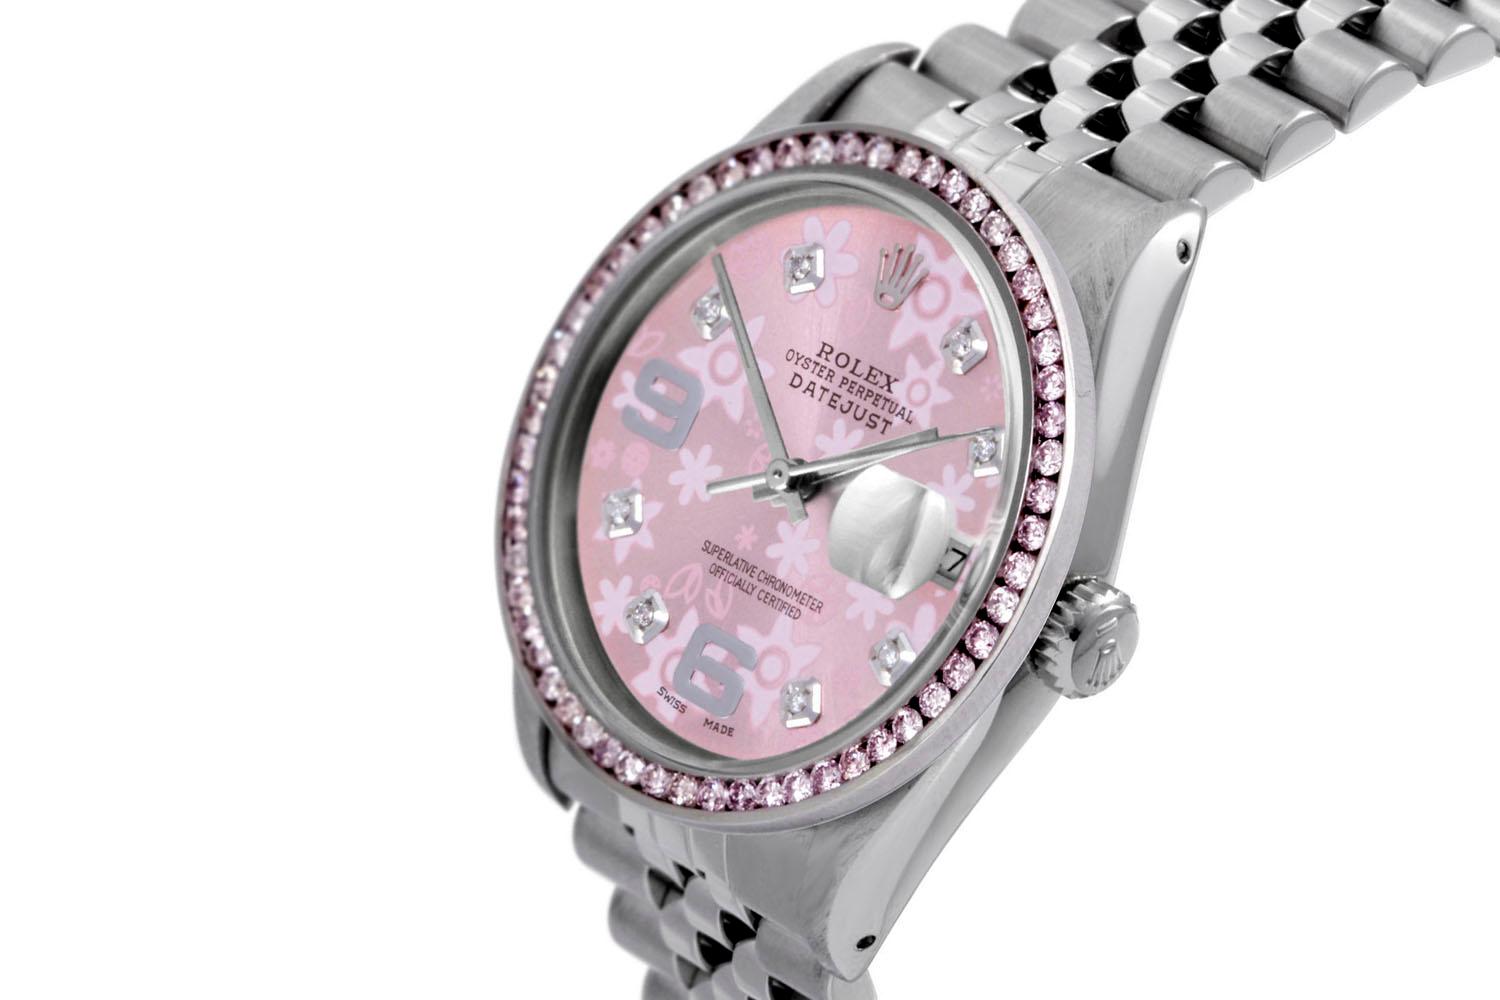 Brand - Rolex
Style - Datejust 
Gender - Unisex
Model - 16014
Case Size - 36mm
Metals - Stainless steel
Crystal - Sapphire
Dial - Custom Pink Floral 6&9 Diamond
Bezel - Steel 1.0CT Rose Stone
Movement - Rolex Cal-3035
Band - Rolex Steel Jubilee
